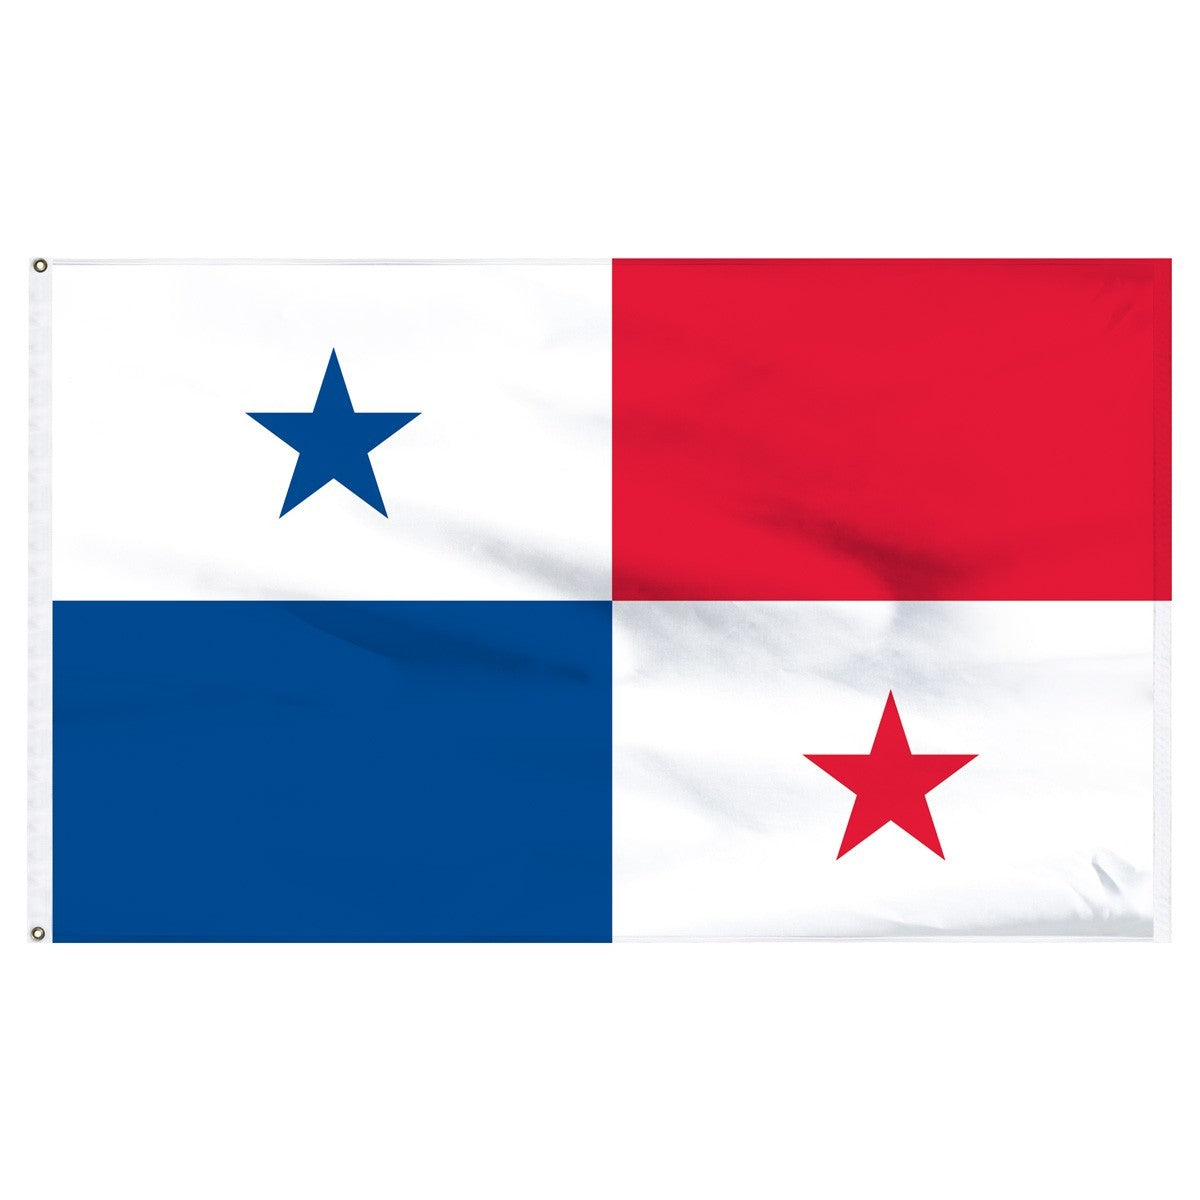 High quality, American made nylon flags. Buy Panama flags with 1-800 flags 